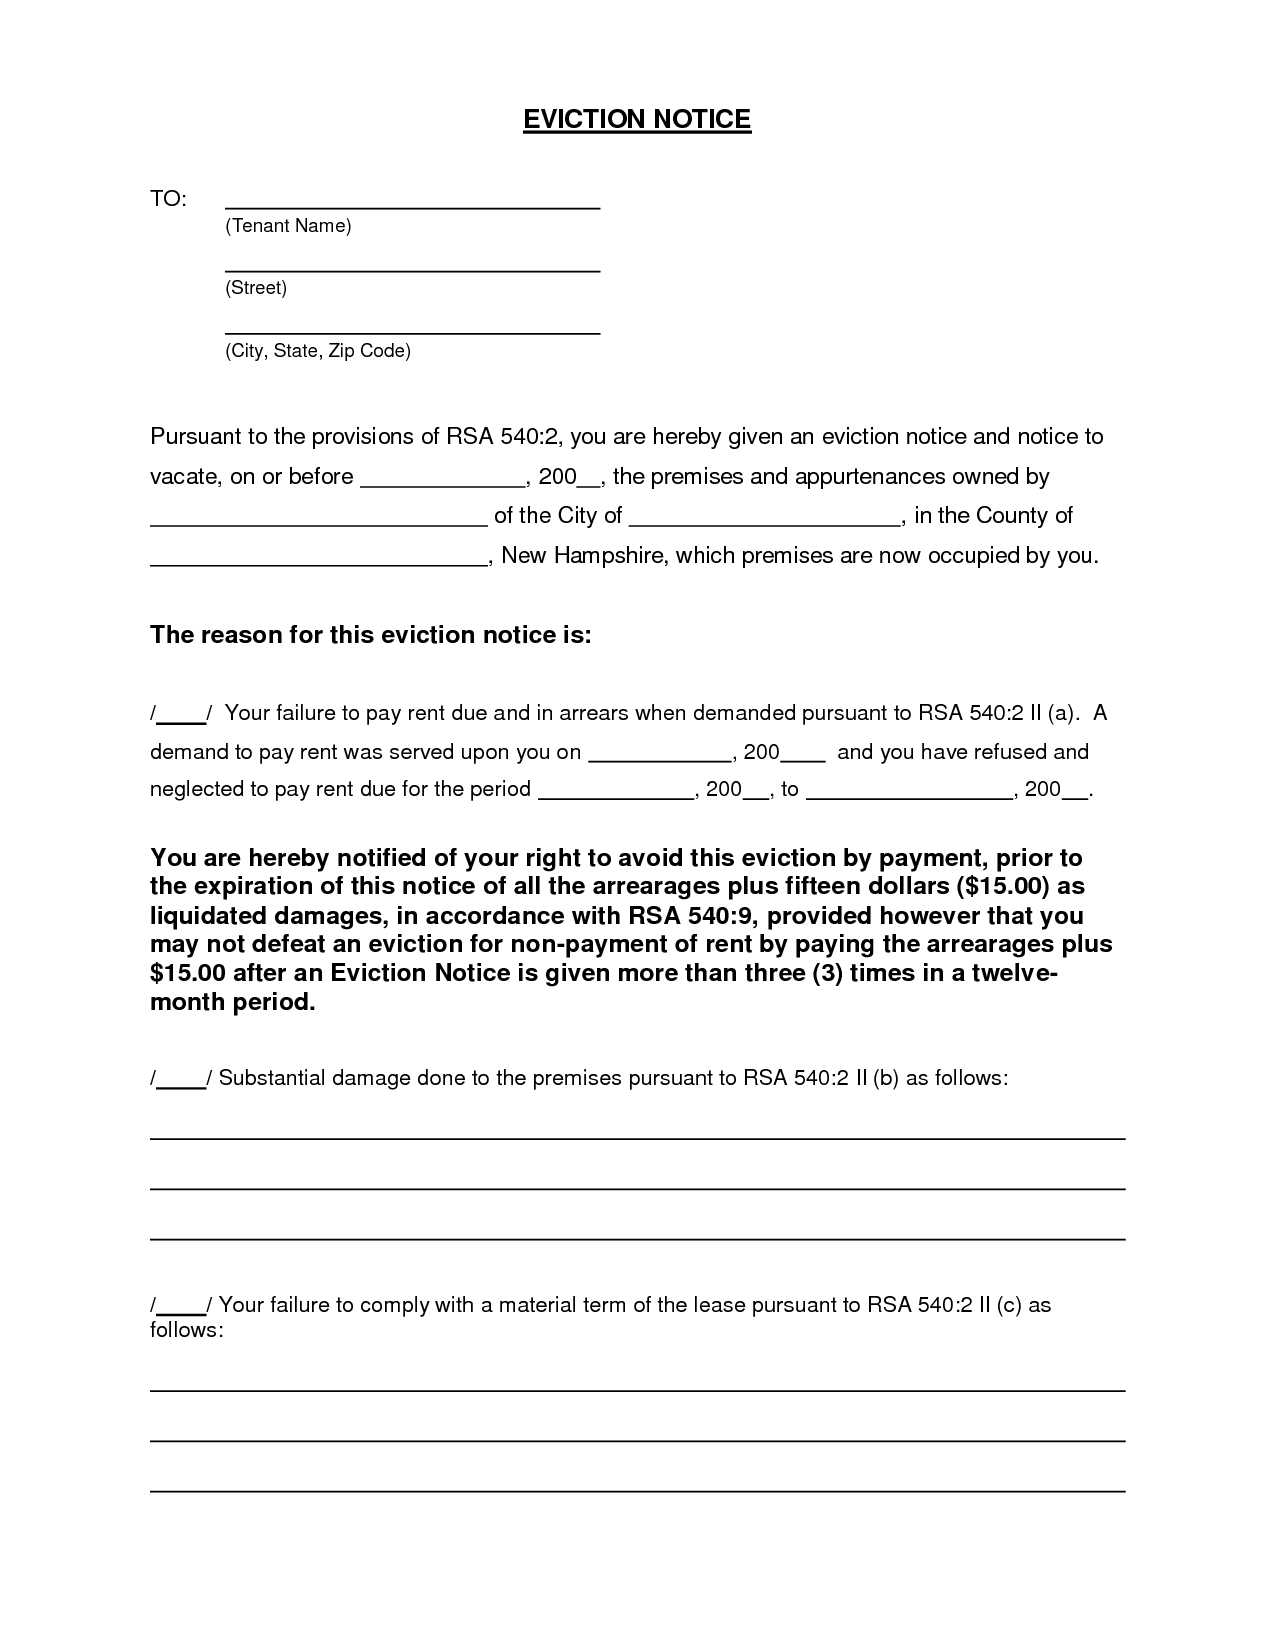 free-texas-eviction-notice-forms-pdf-word-templates